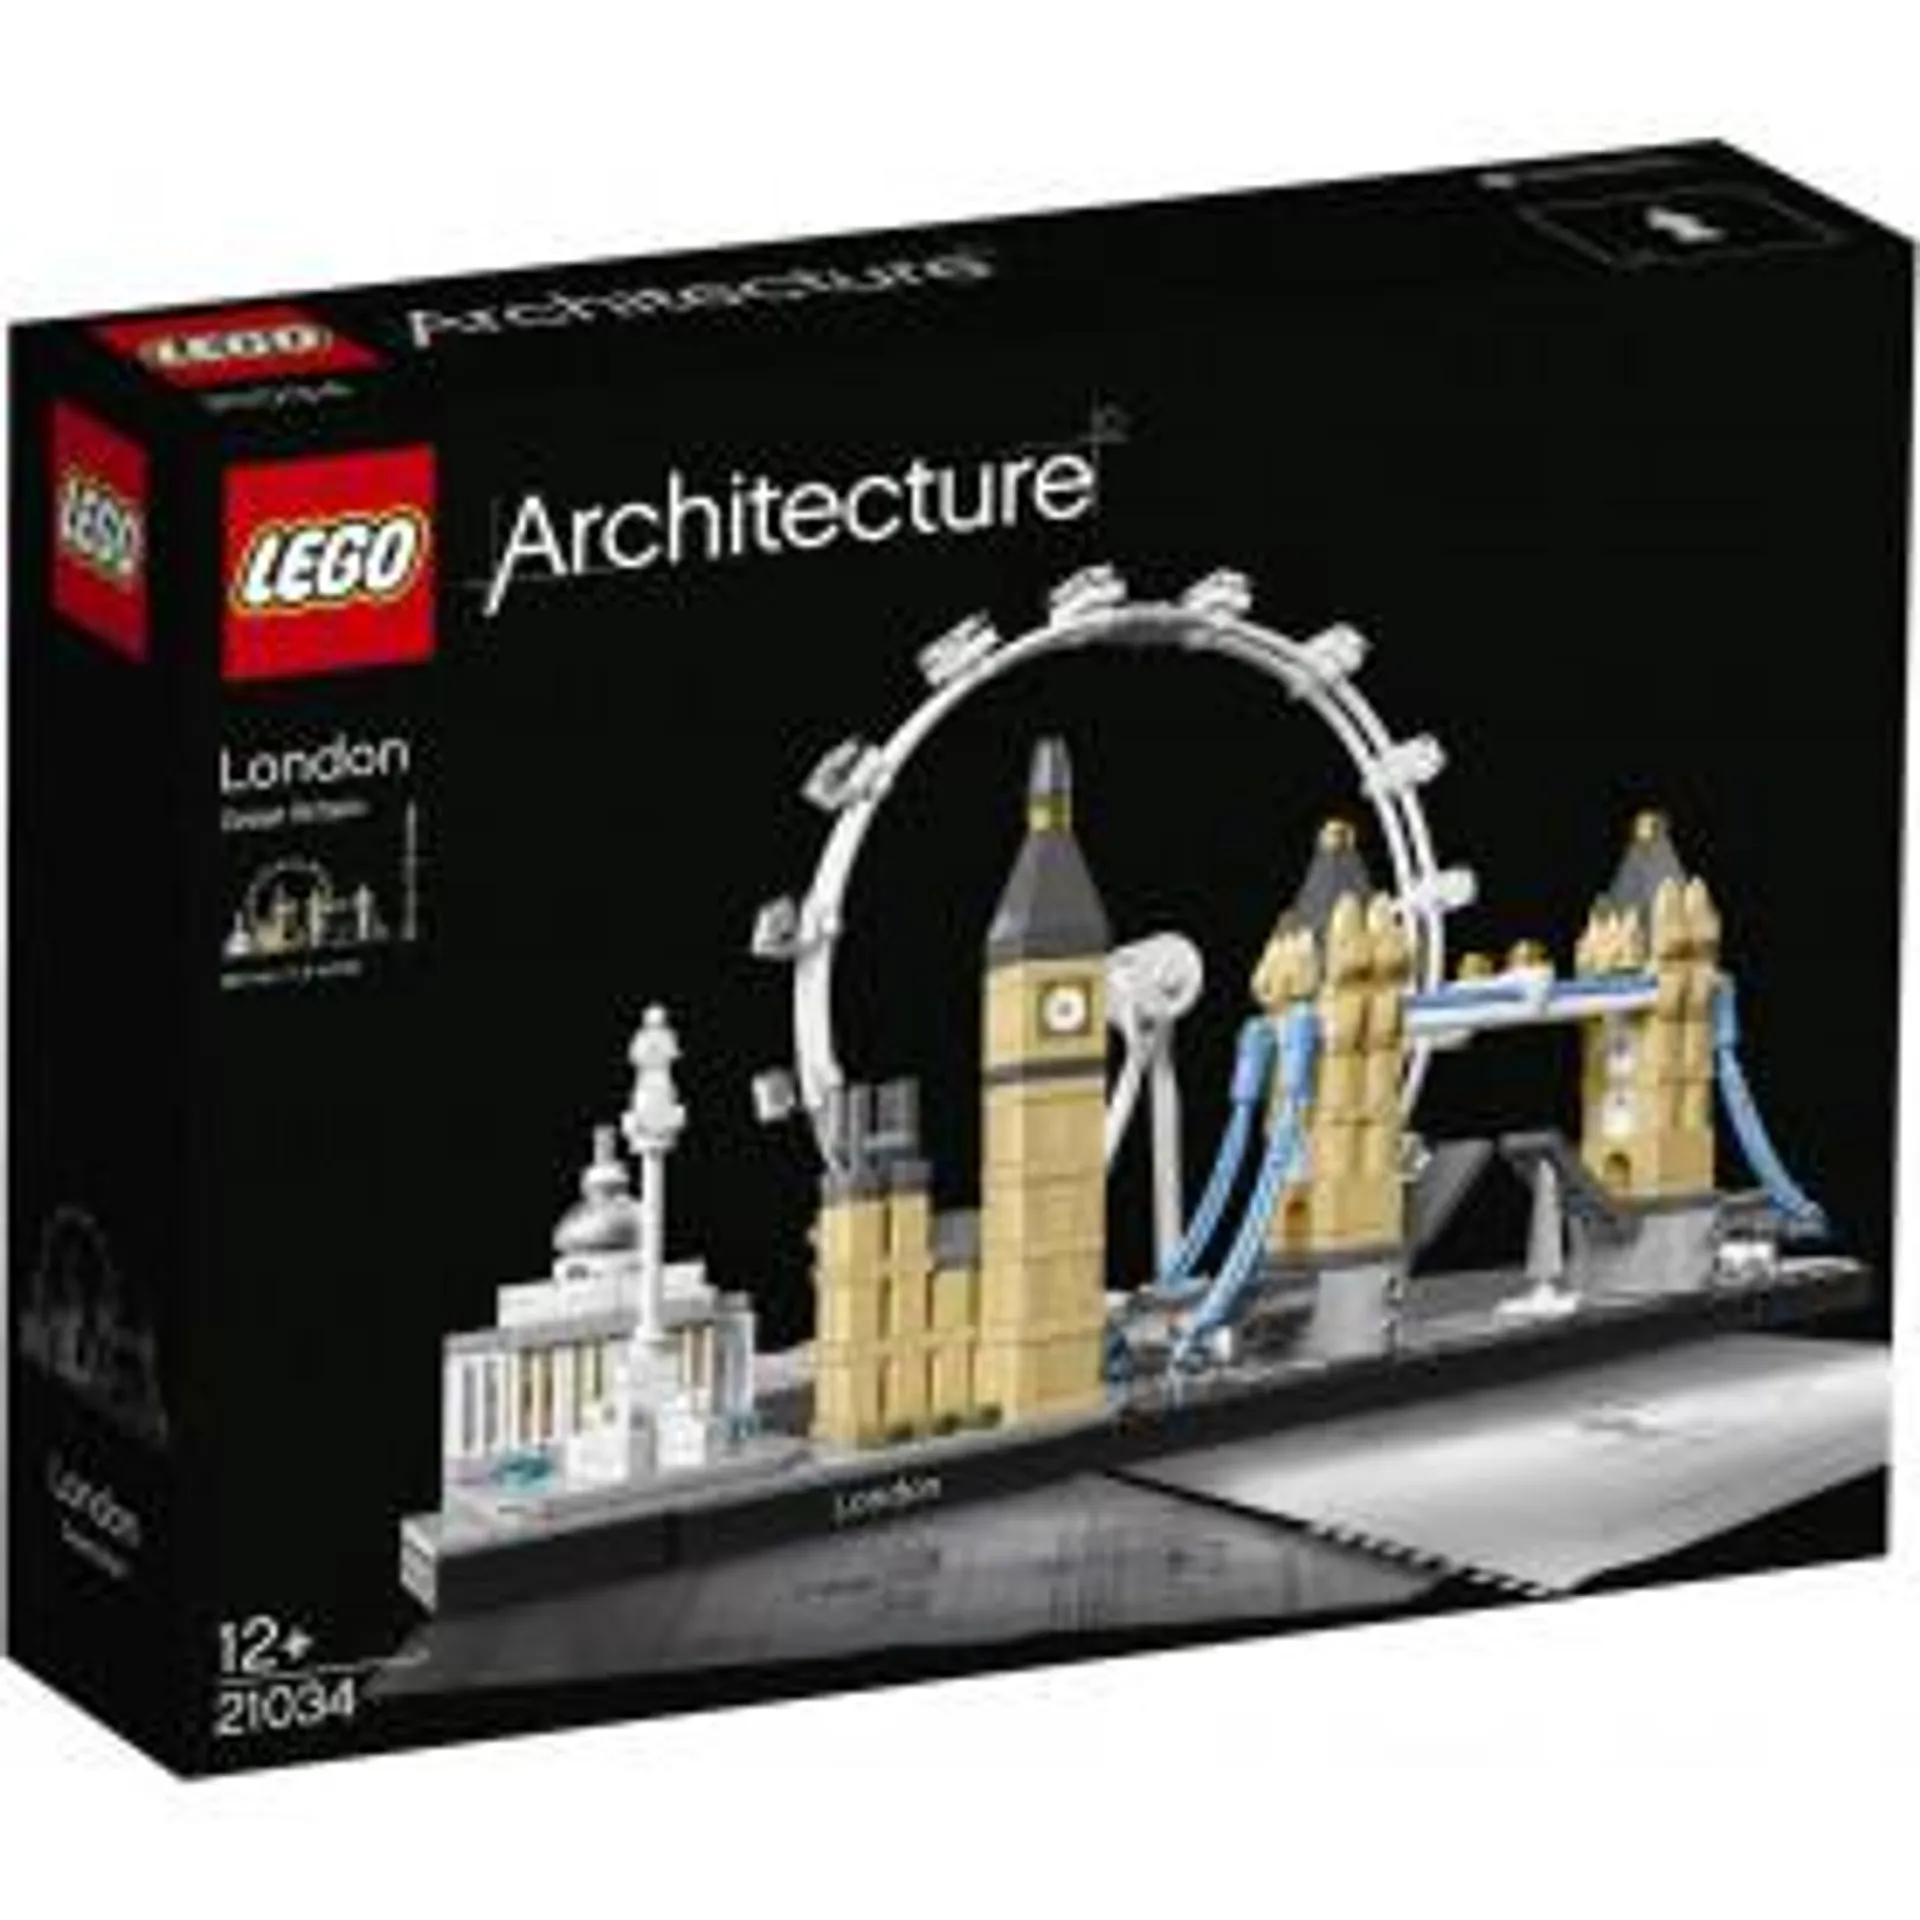 LEGO Architecture London 21034 (Limited)